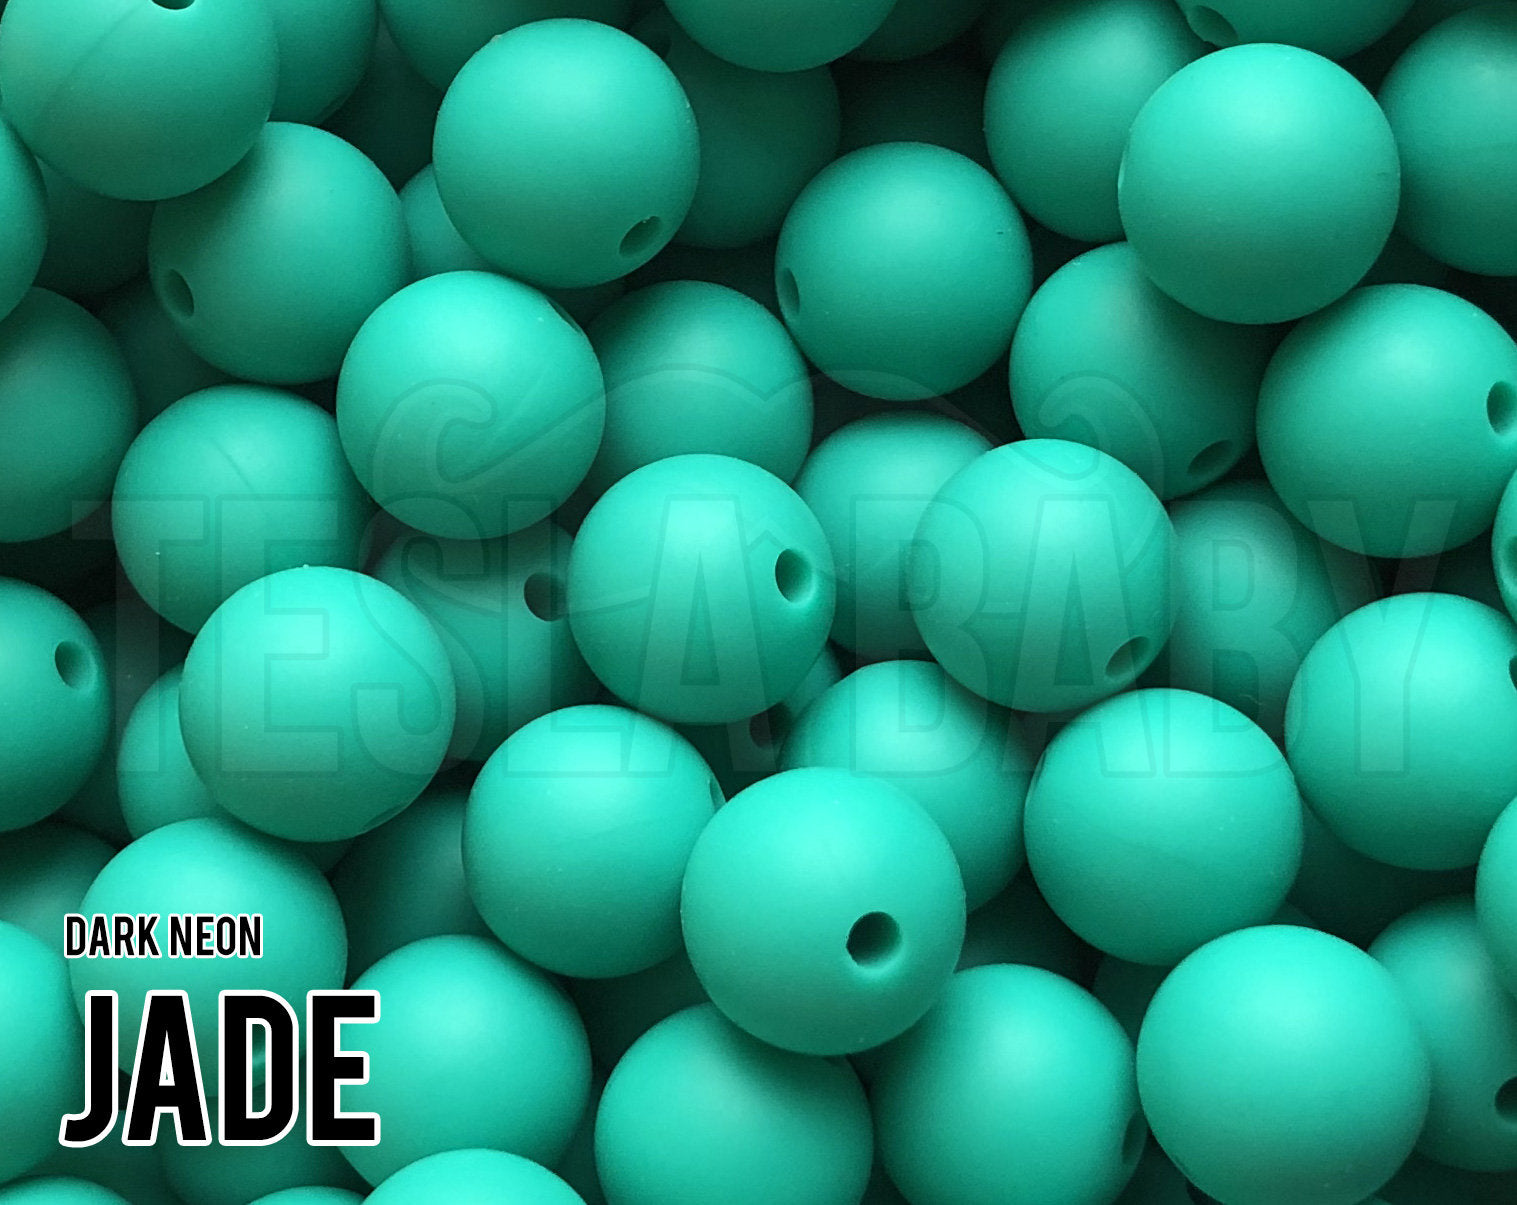 Silicone Beads, 12 mm Jade Silicone Beads - Dark Neon - 5-1,000 (aka dark green, dark teal green) Bulk Silicone Beads Wholesale